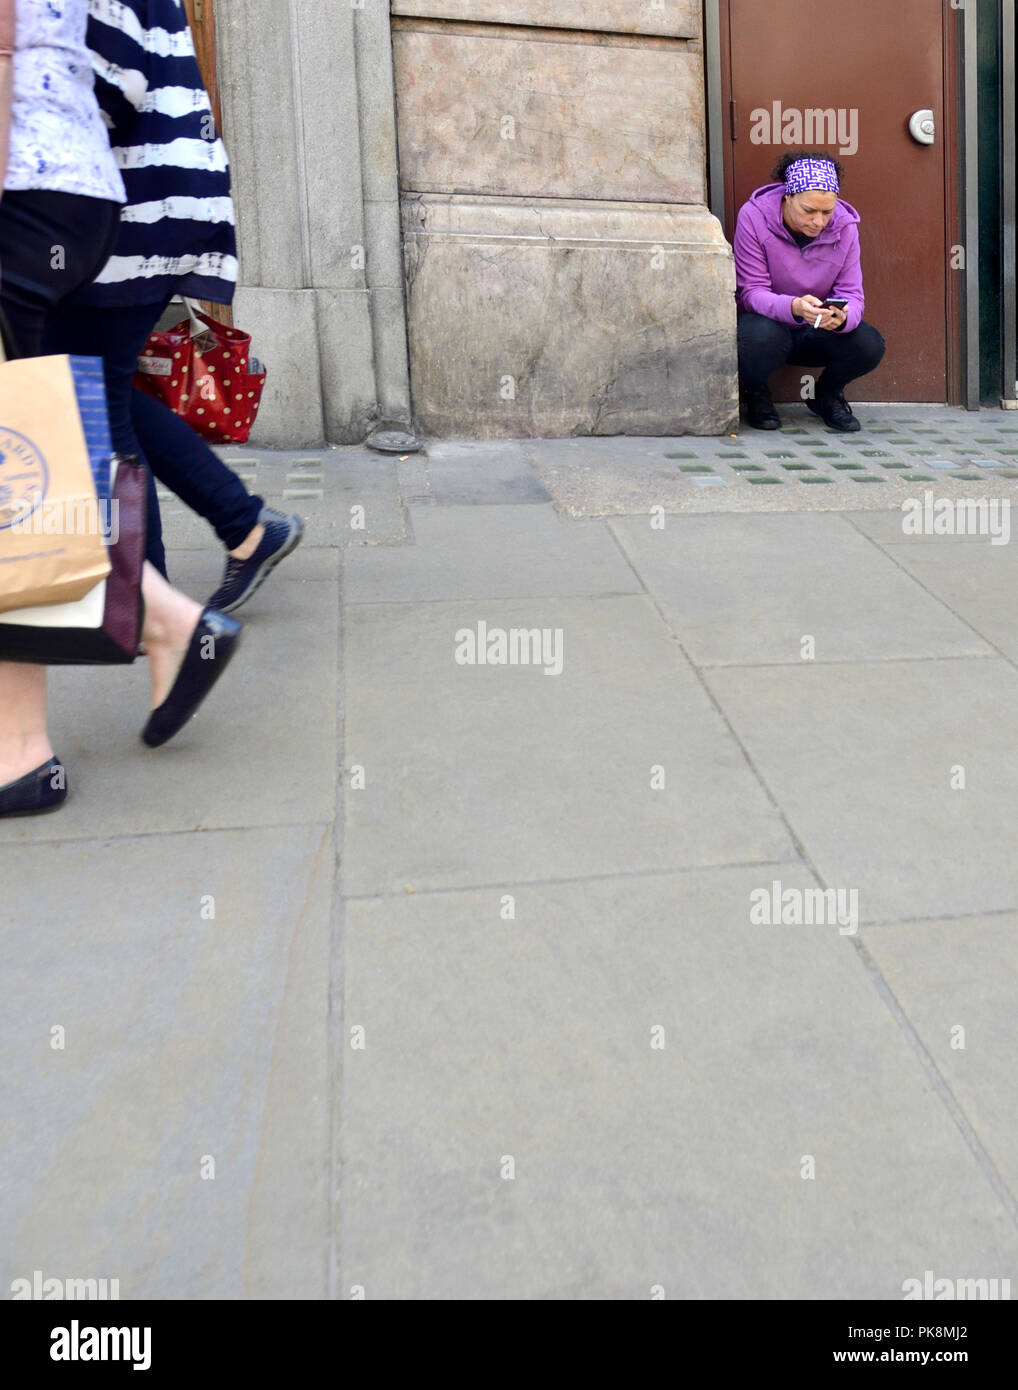 Woman kneeling down in the street with a cigarette and a mobile phone, London,England, UK. Stock Photo